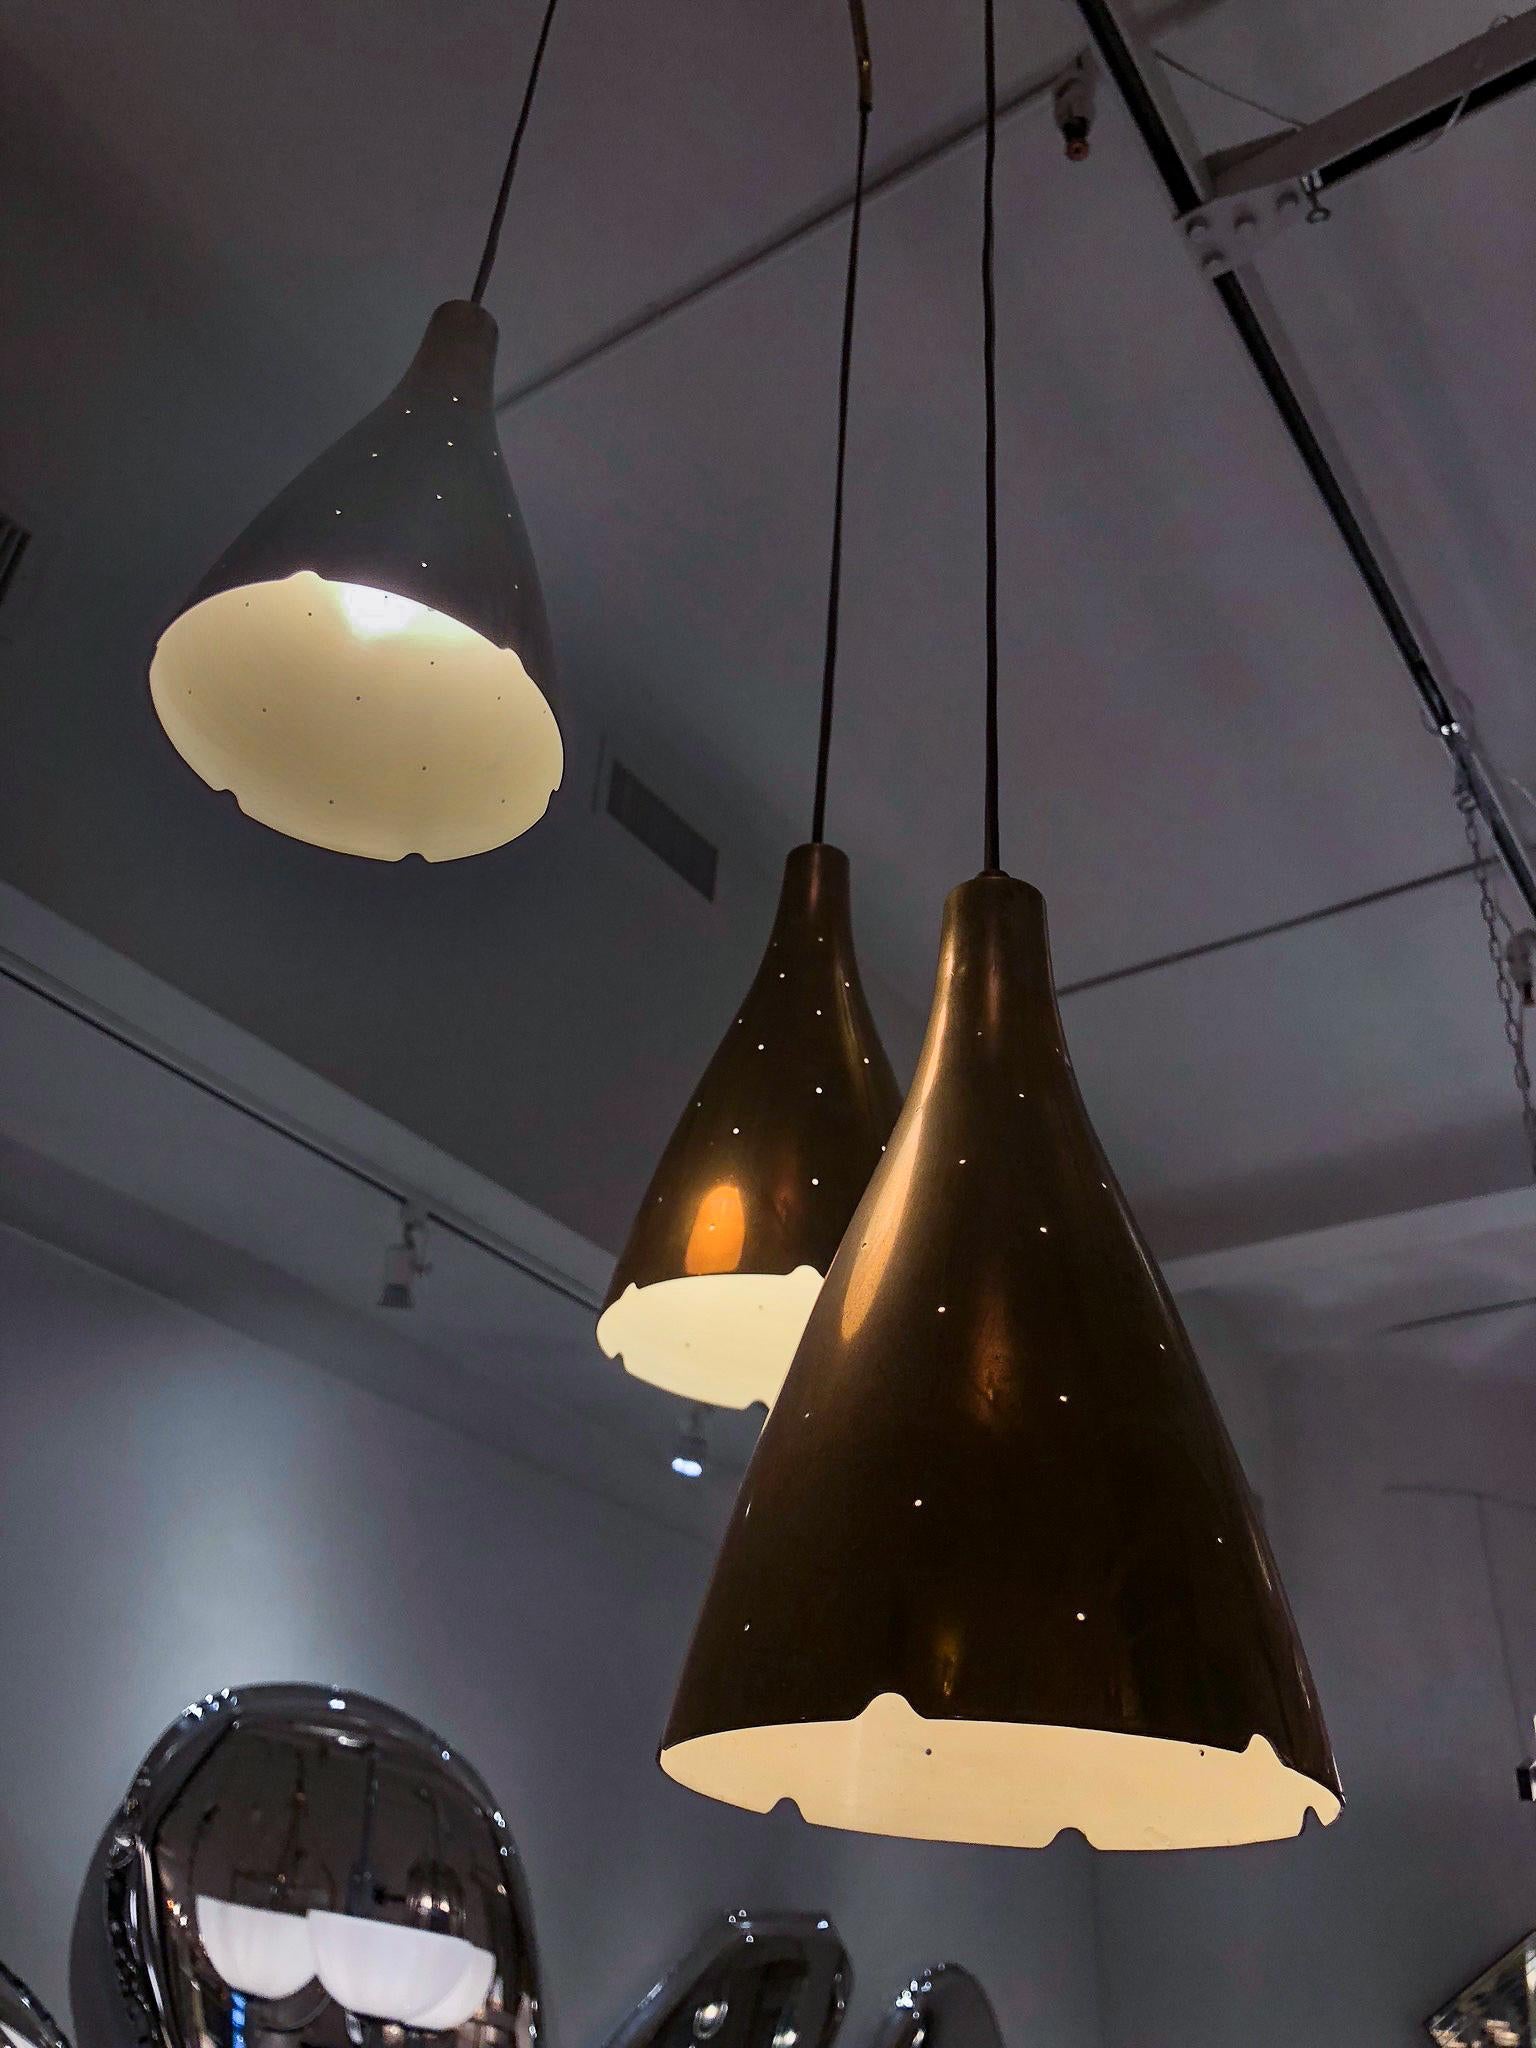 Three perforated and conical brass shades, suspended at different heights from a three-spoke canopy. Designed by Tynell, produced by Taito Oy.
Lantern body: Height 10”.

OUR REFERENCE N6958